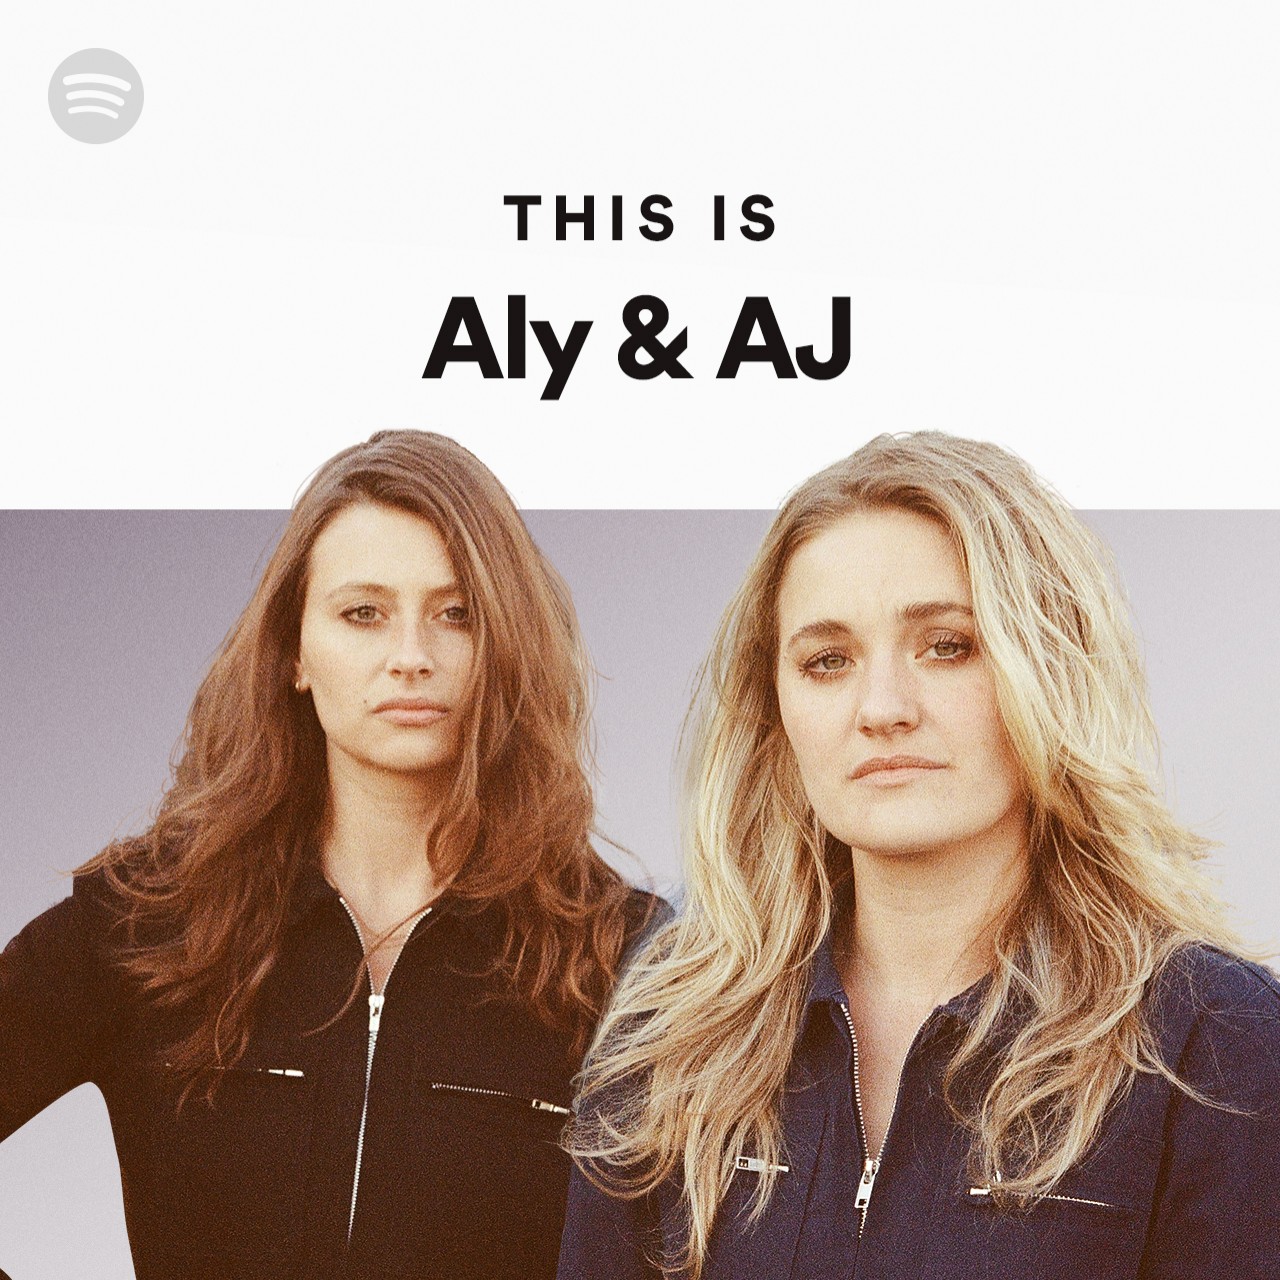 This Is Aly & AJ